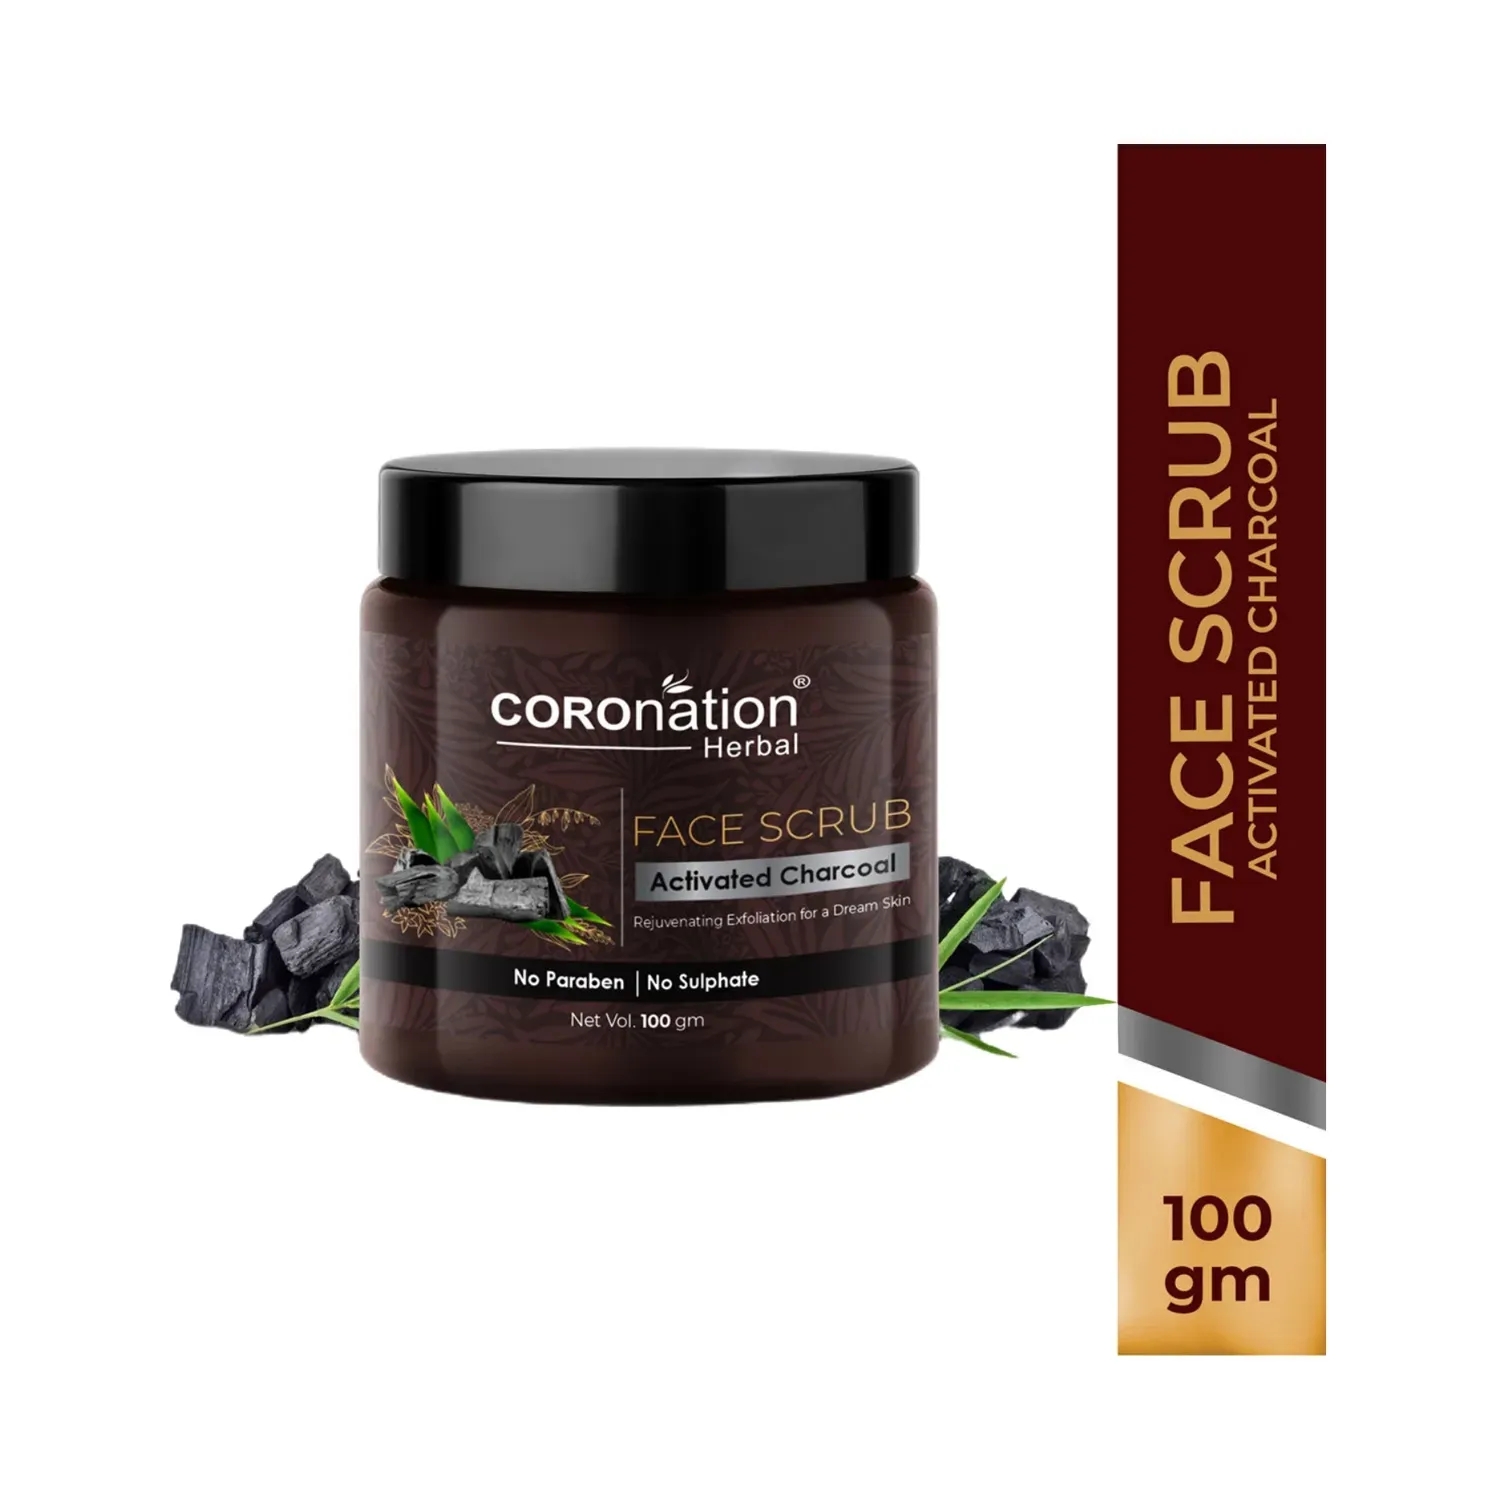 COROnation Herbal | COROnation Herbal Activated Charcoal Face Scrub (100g)